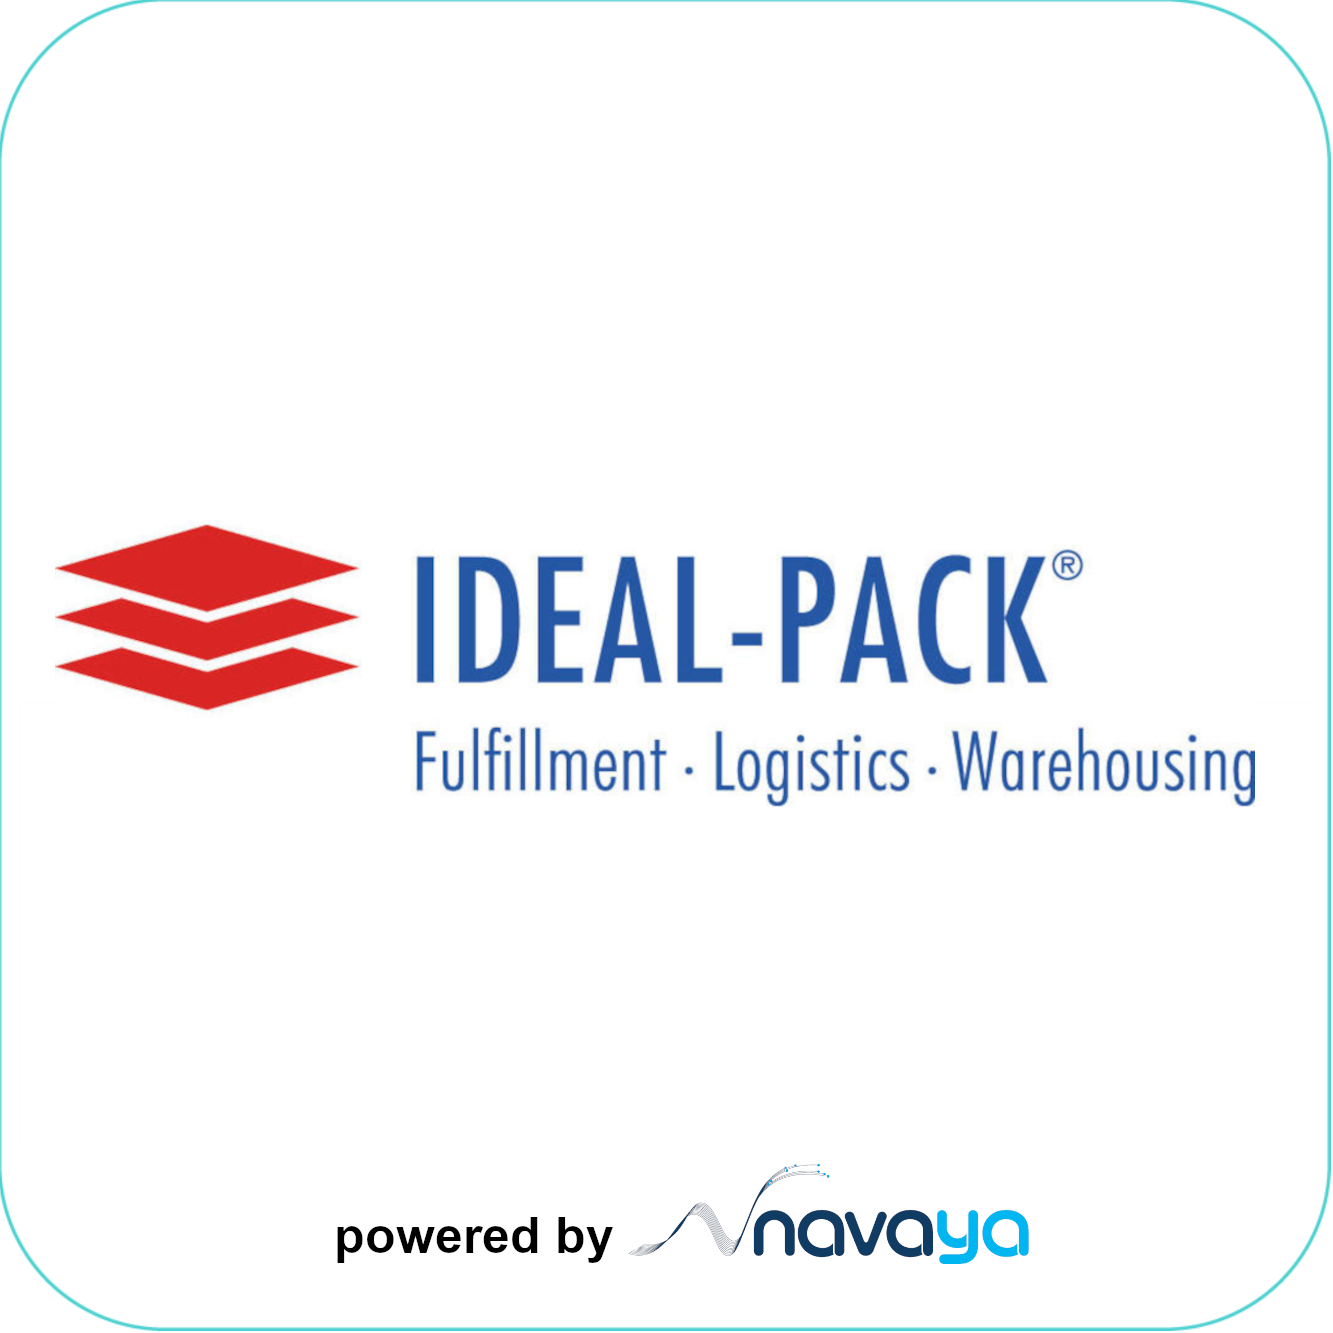 IDEAL-PACK